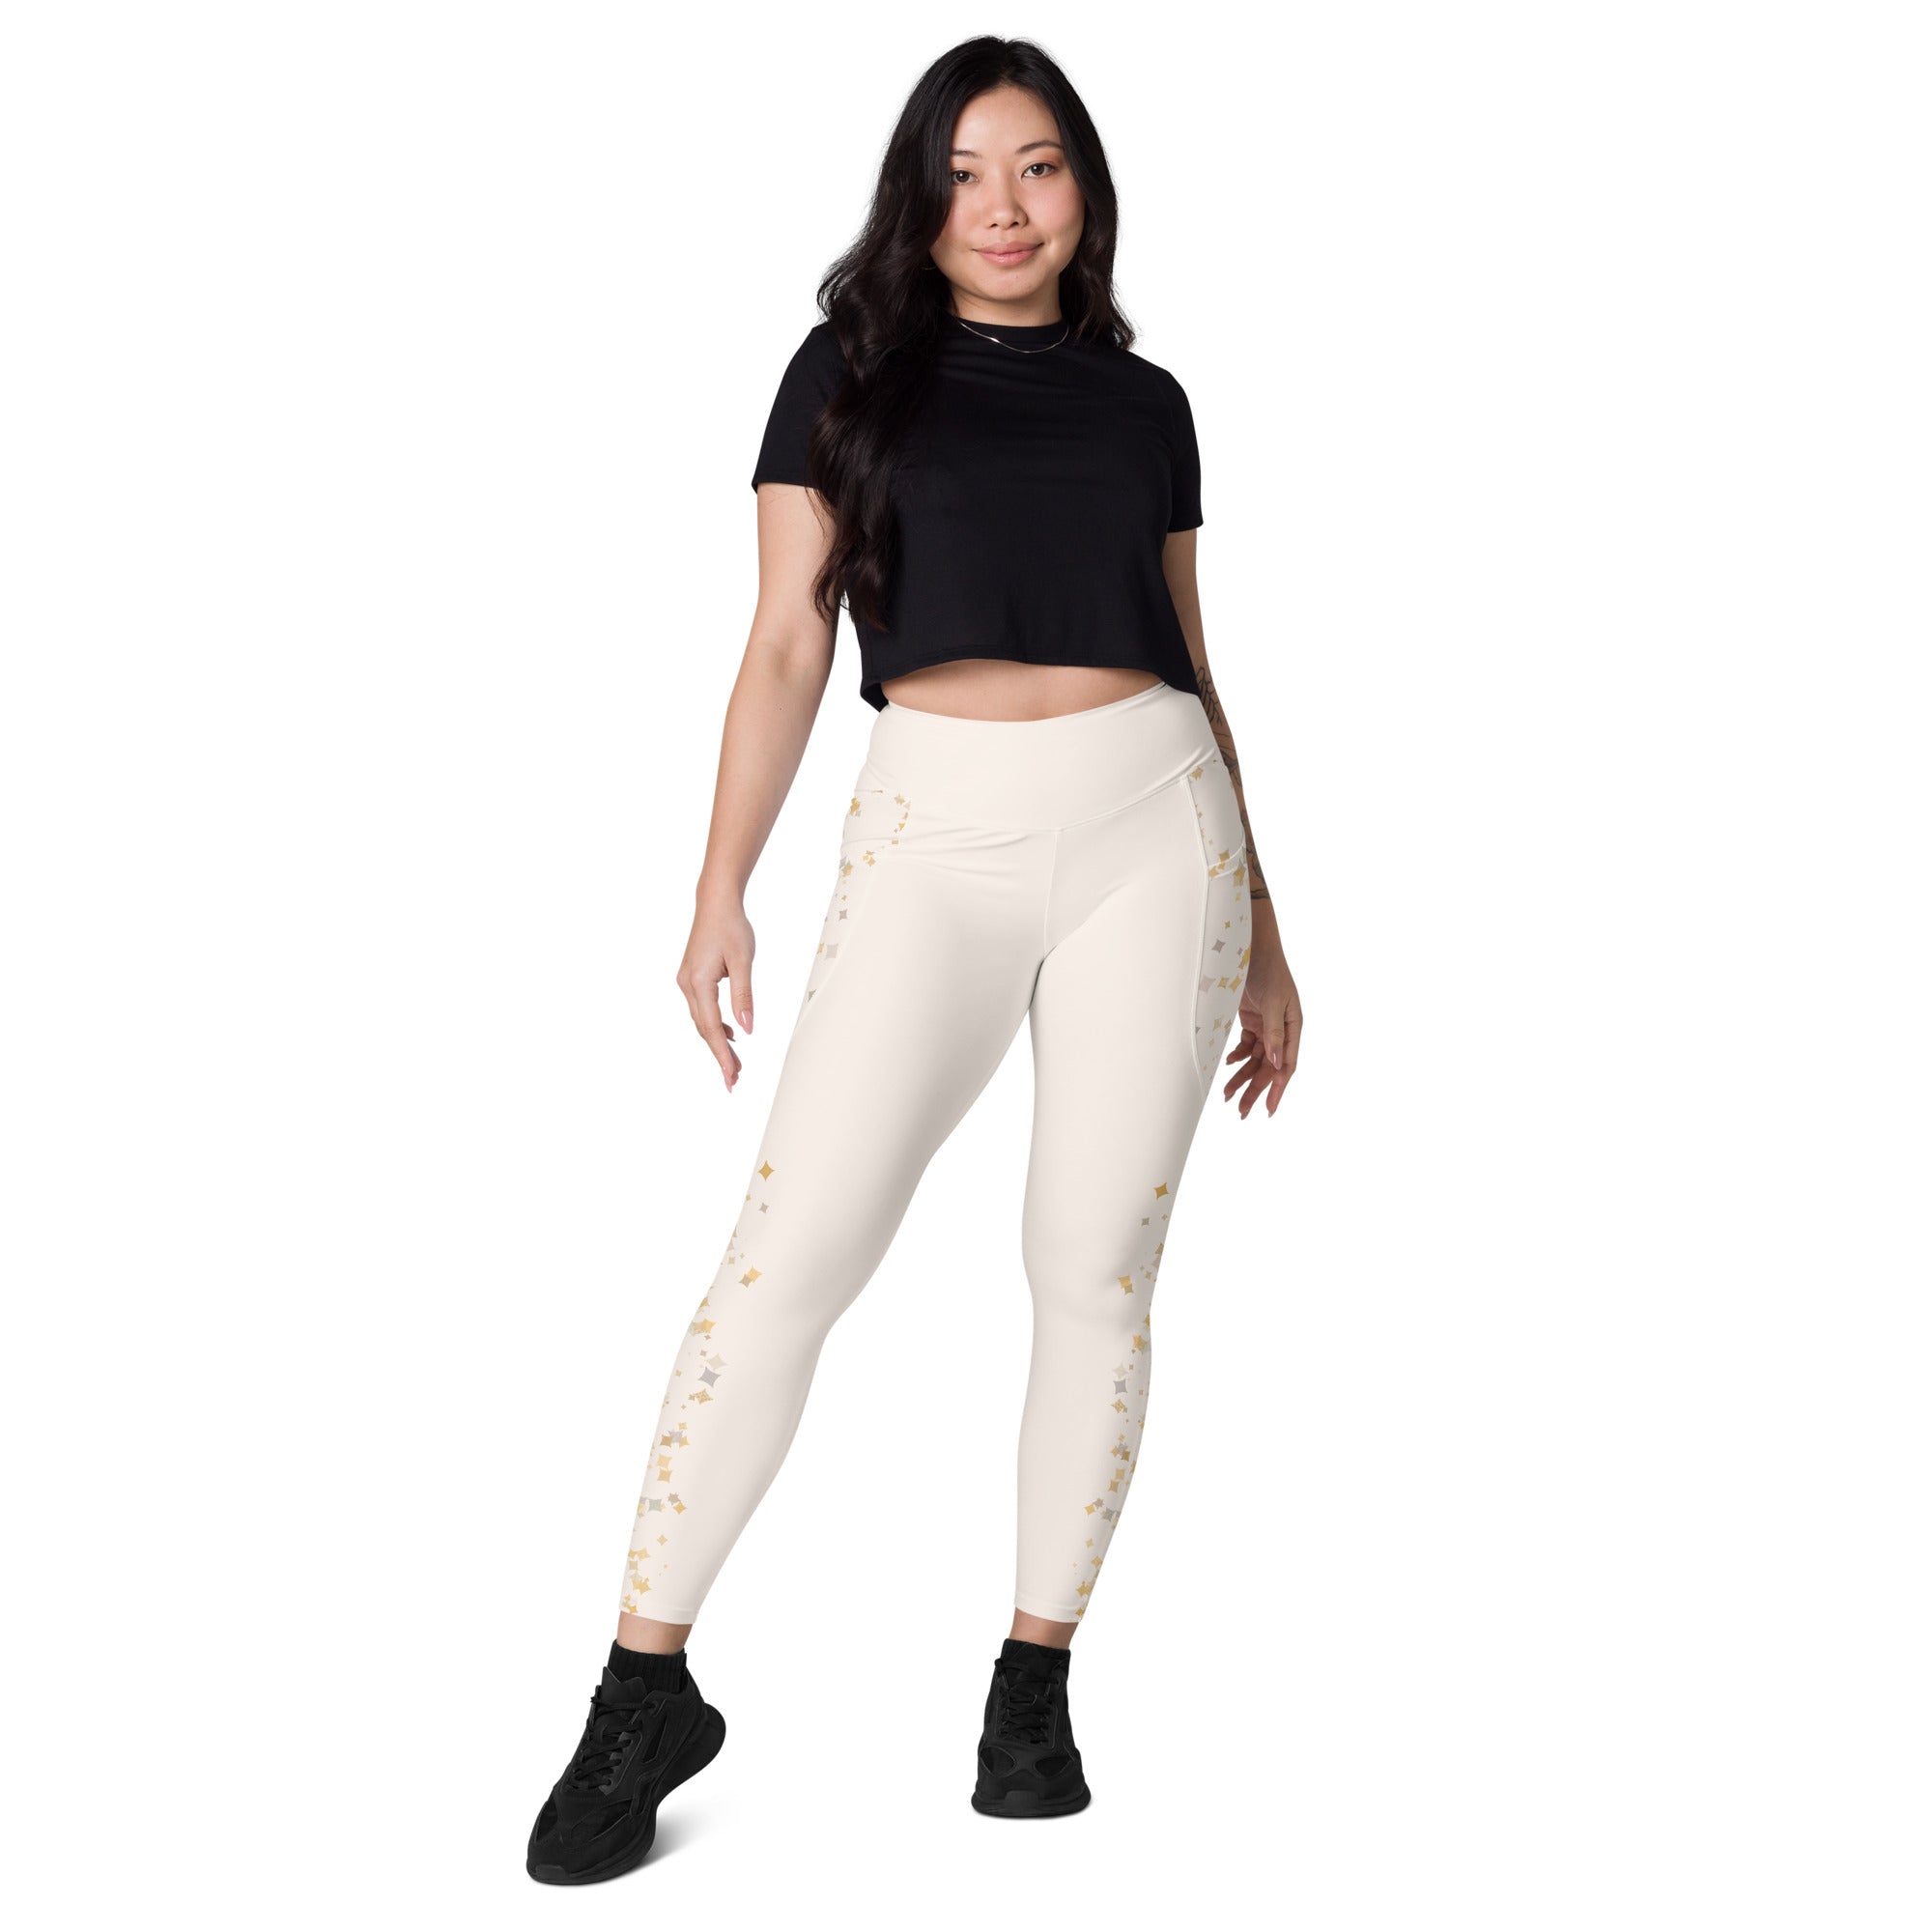 Fearless Leggings with pockets